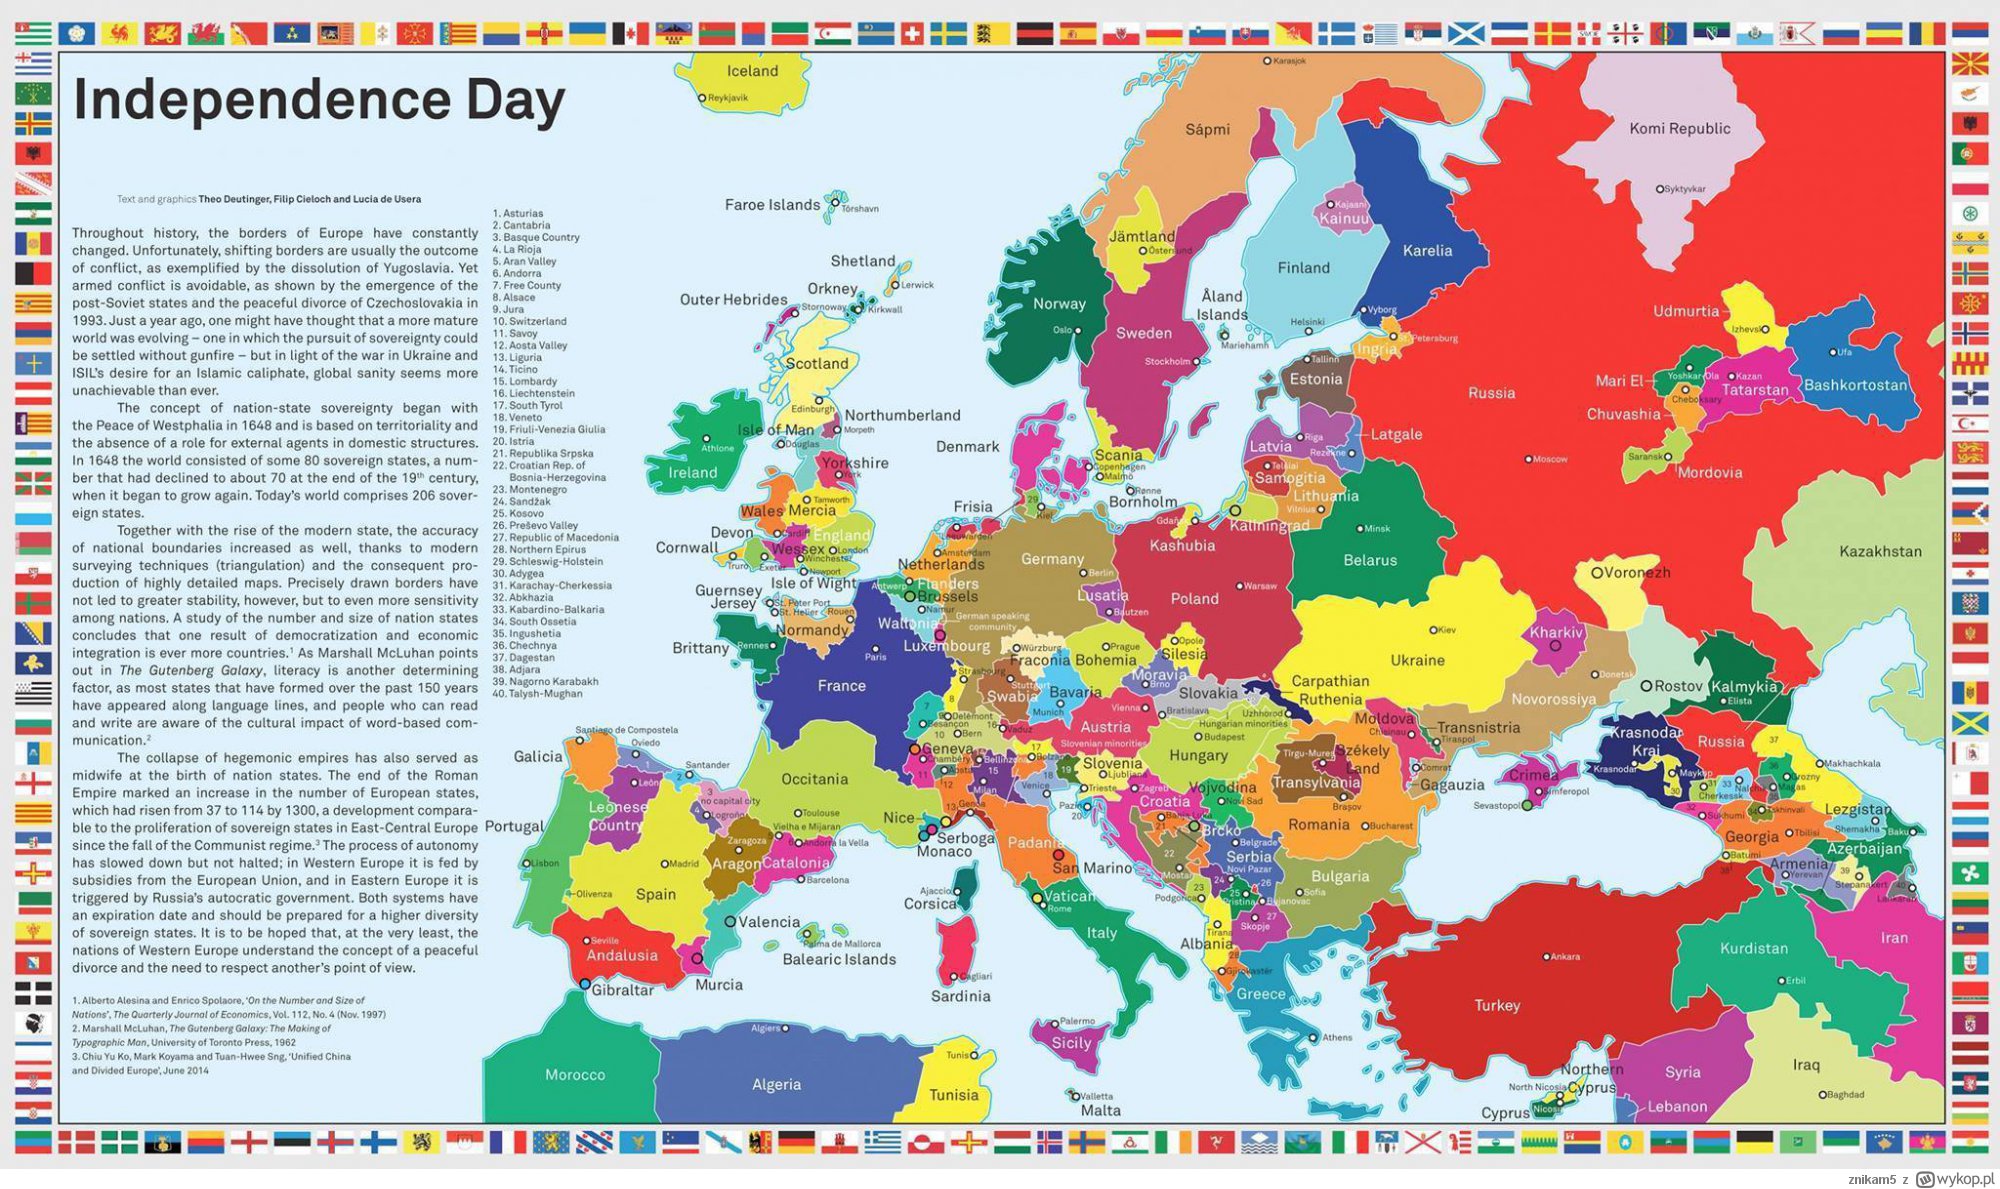 Europe according to secessionist movements